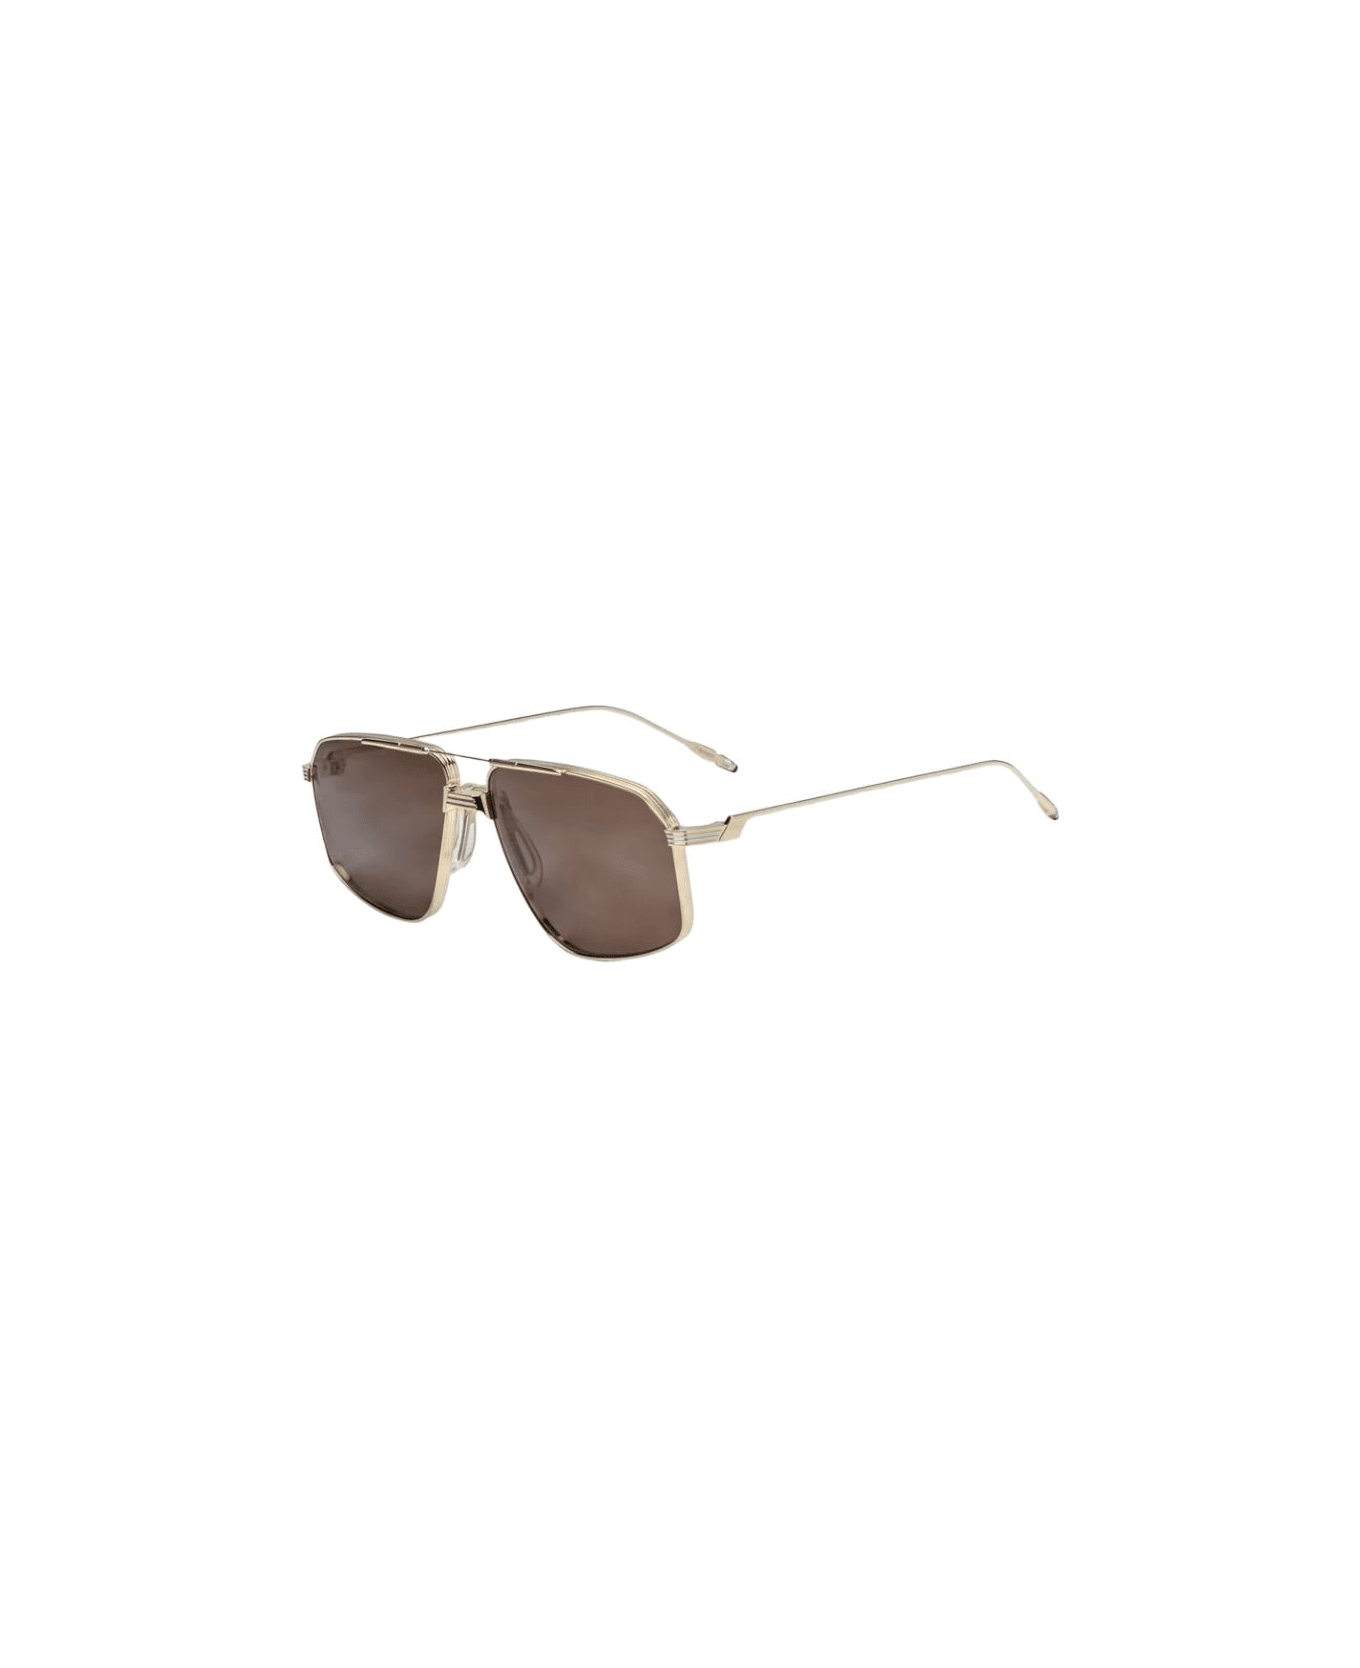 Jacques Marie Mage Jagger - Coco Sunglasses